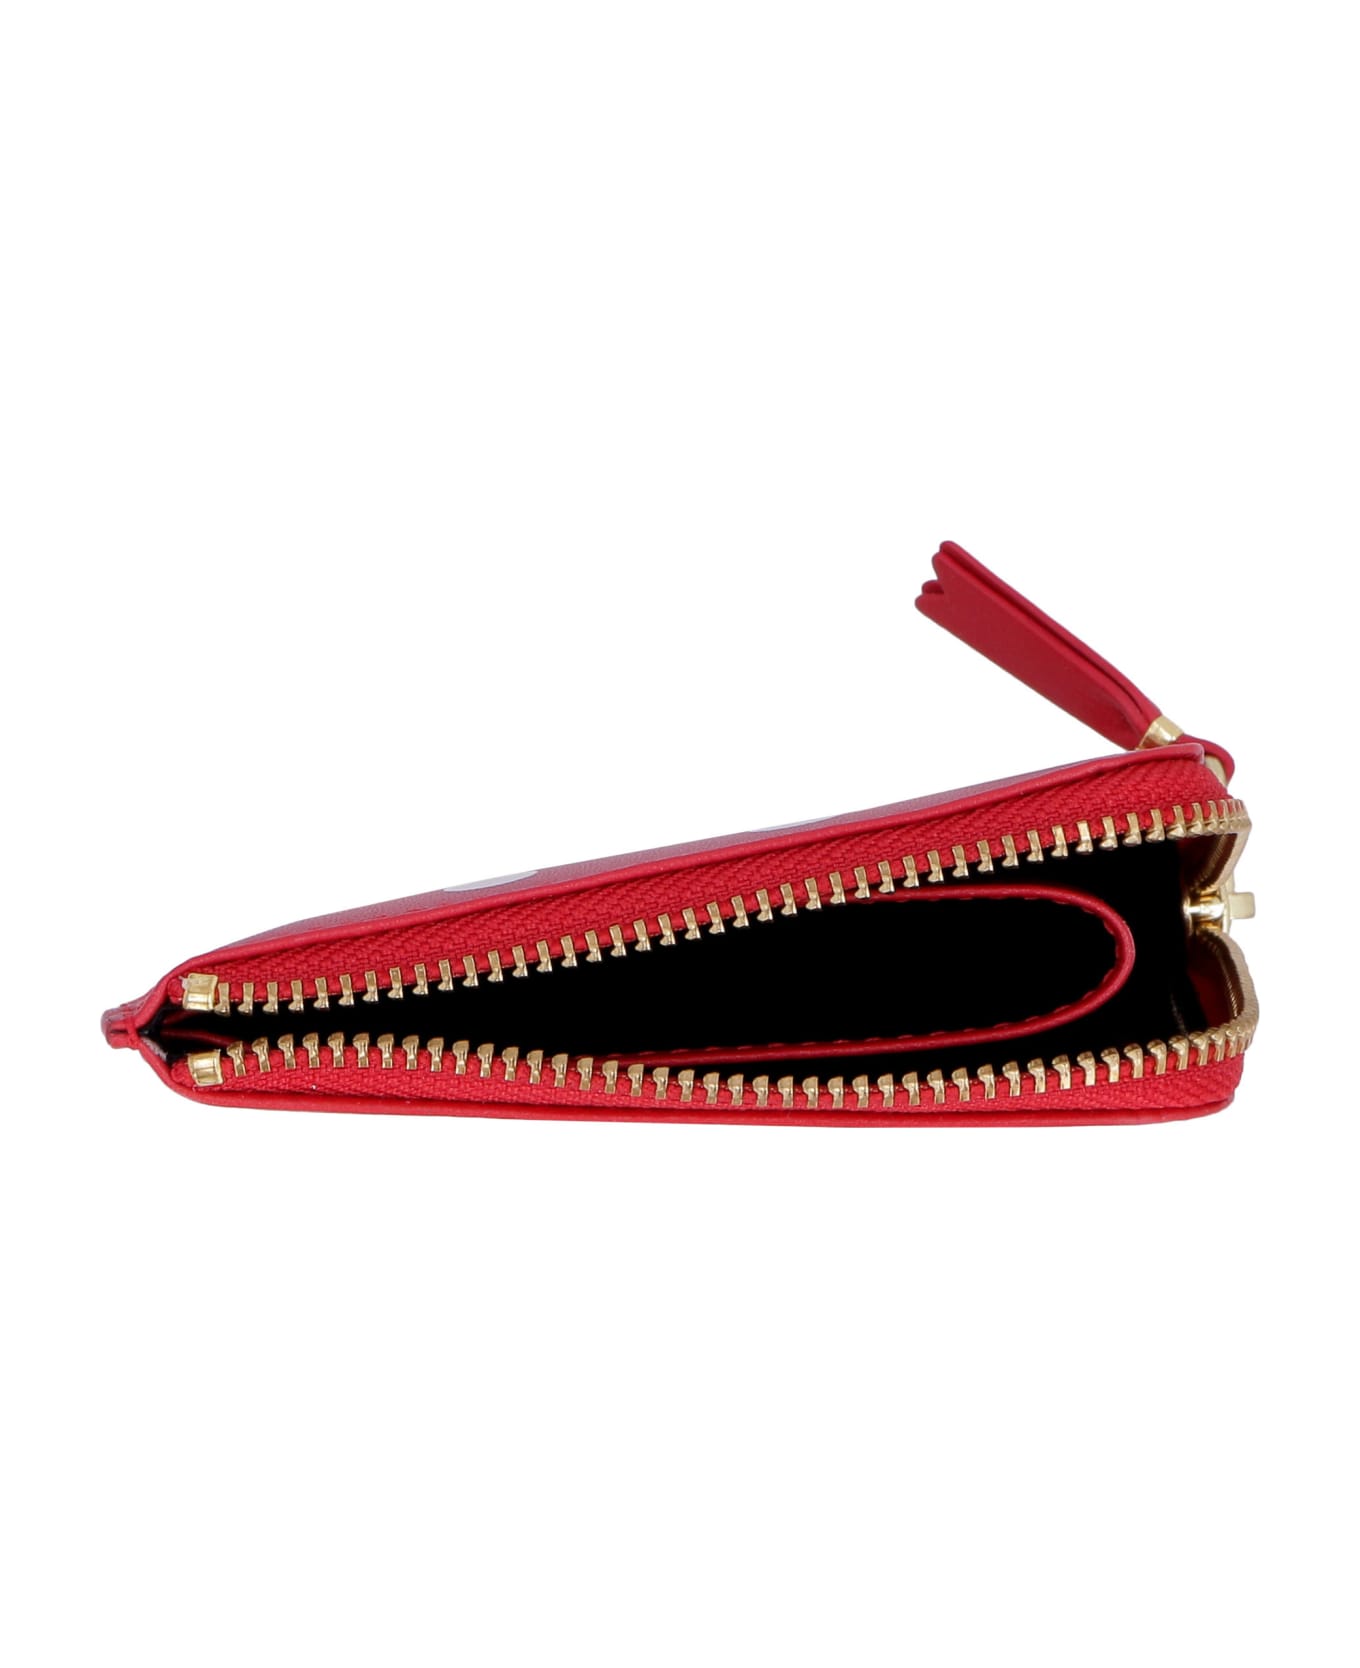 Comme des Garçons Wallet Leather Zipped Coin Purse - Red Red 財布